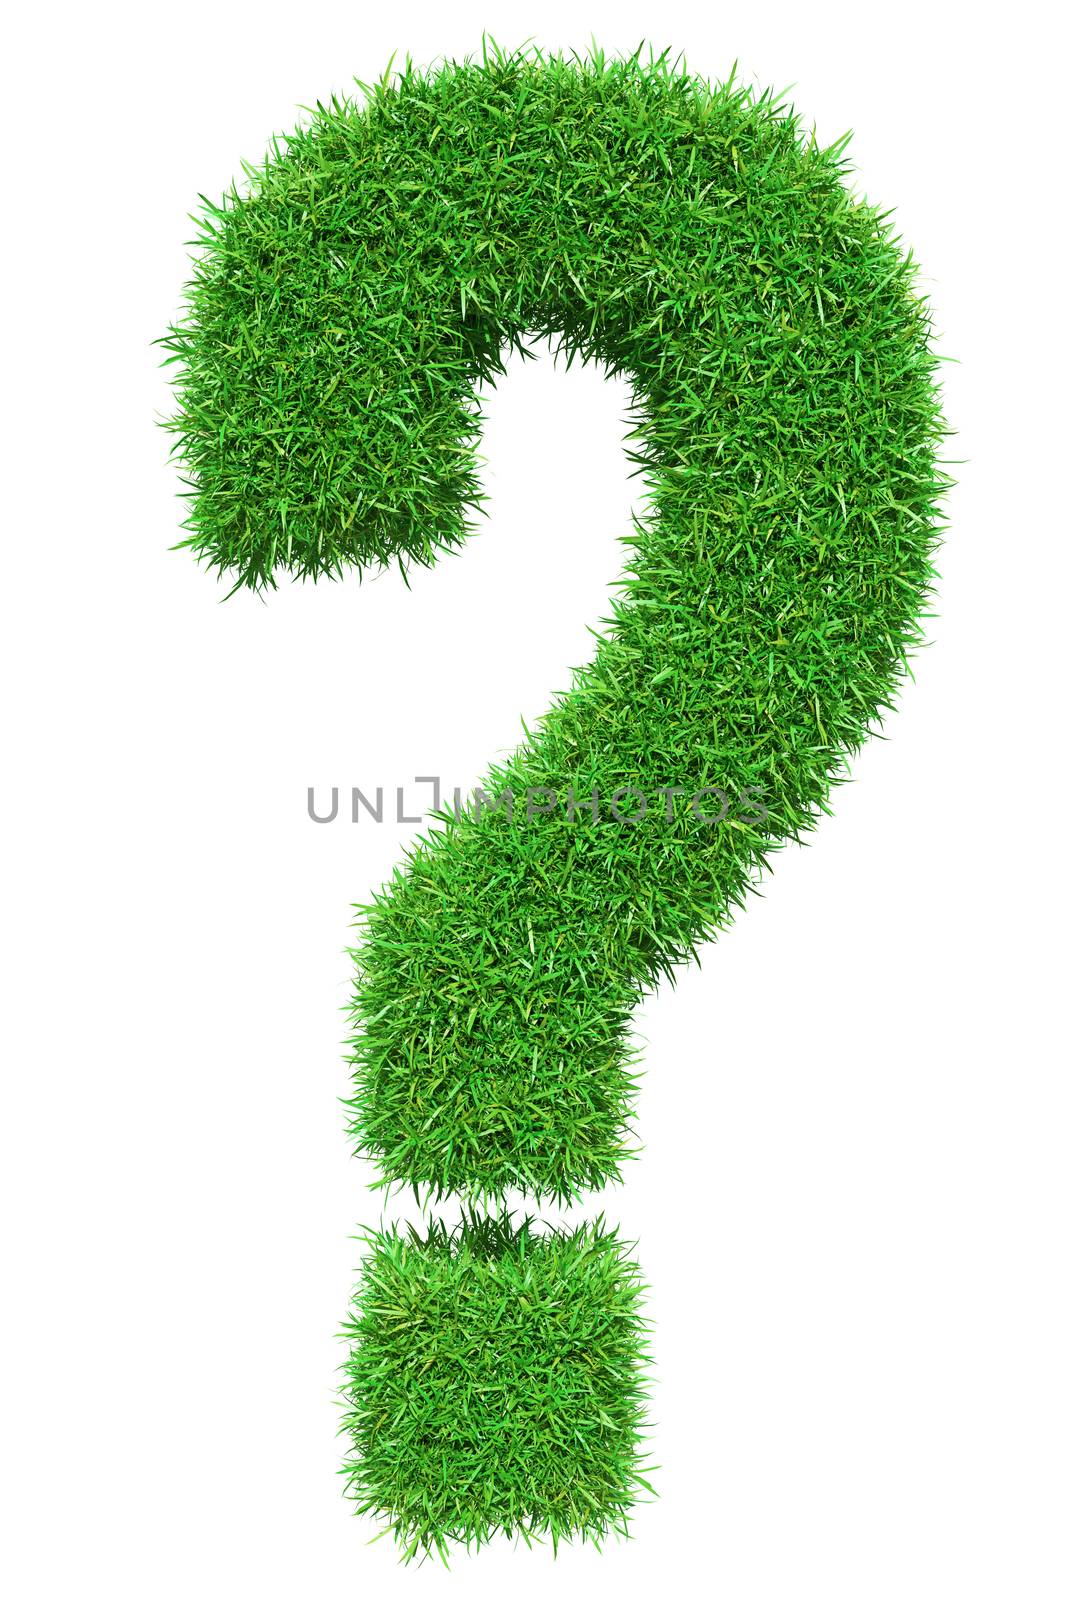 Green grass question mark, isolated on white background. 3D illustration